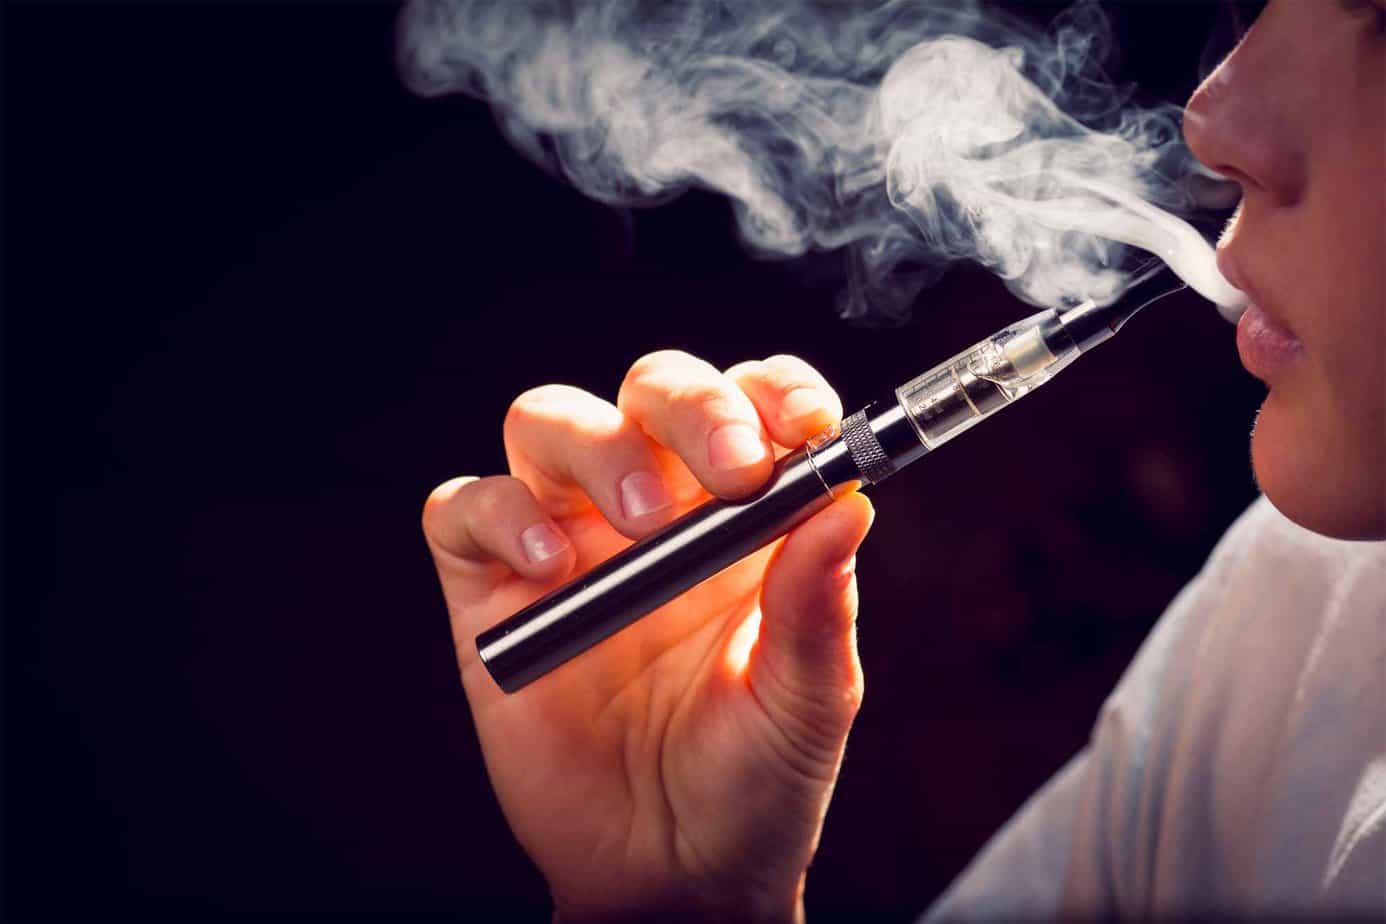 CDC Investigating 380 Cases of Lung Disease Linked to Vaping